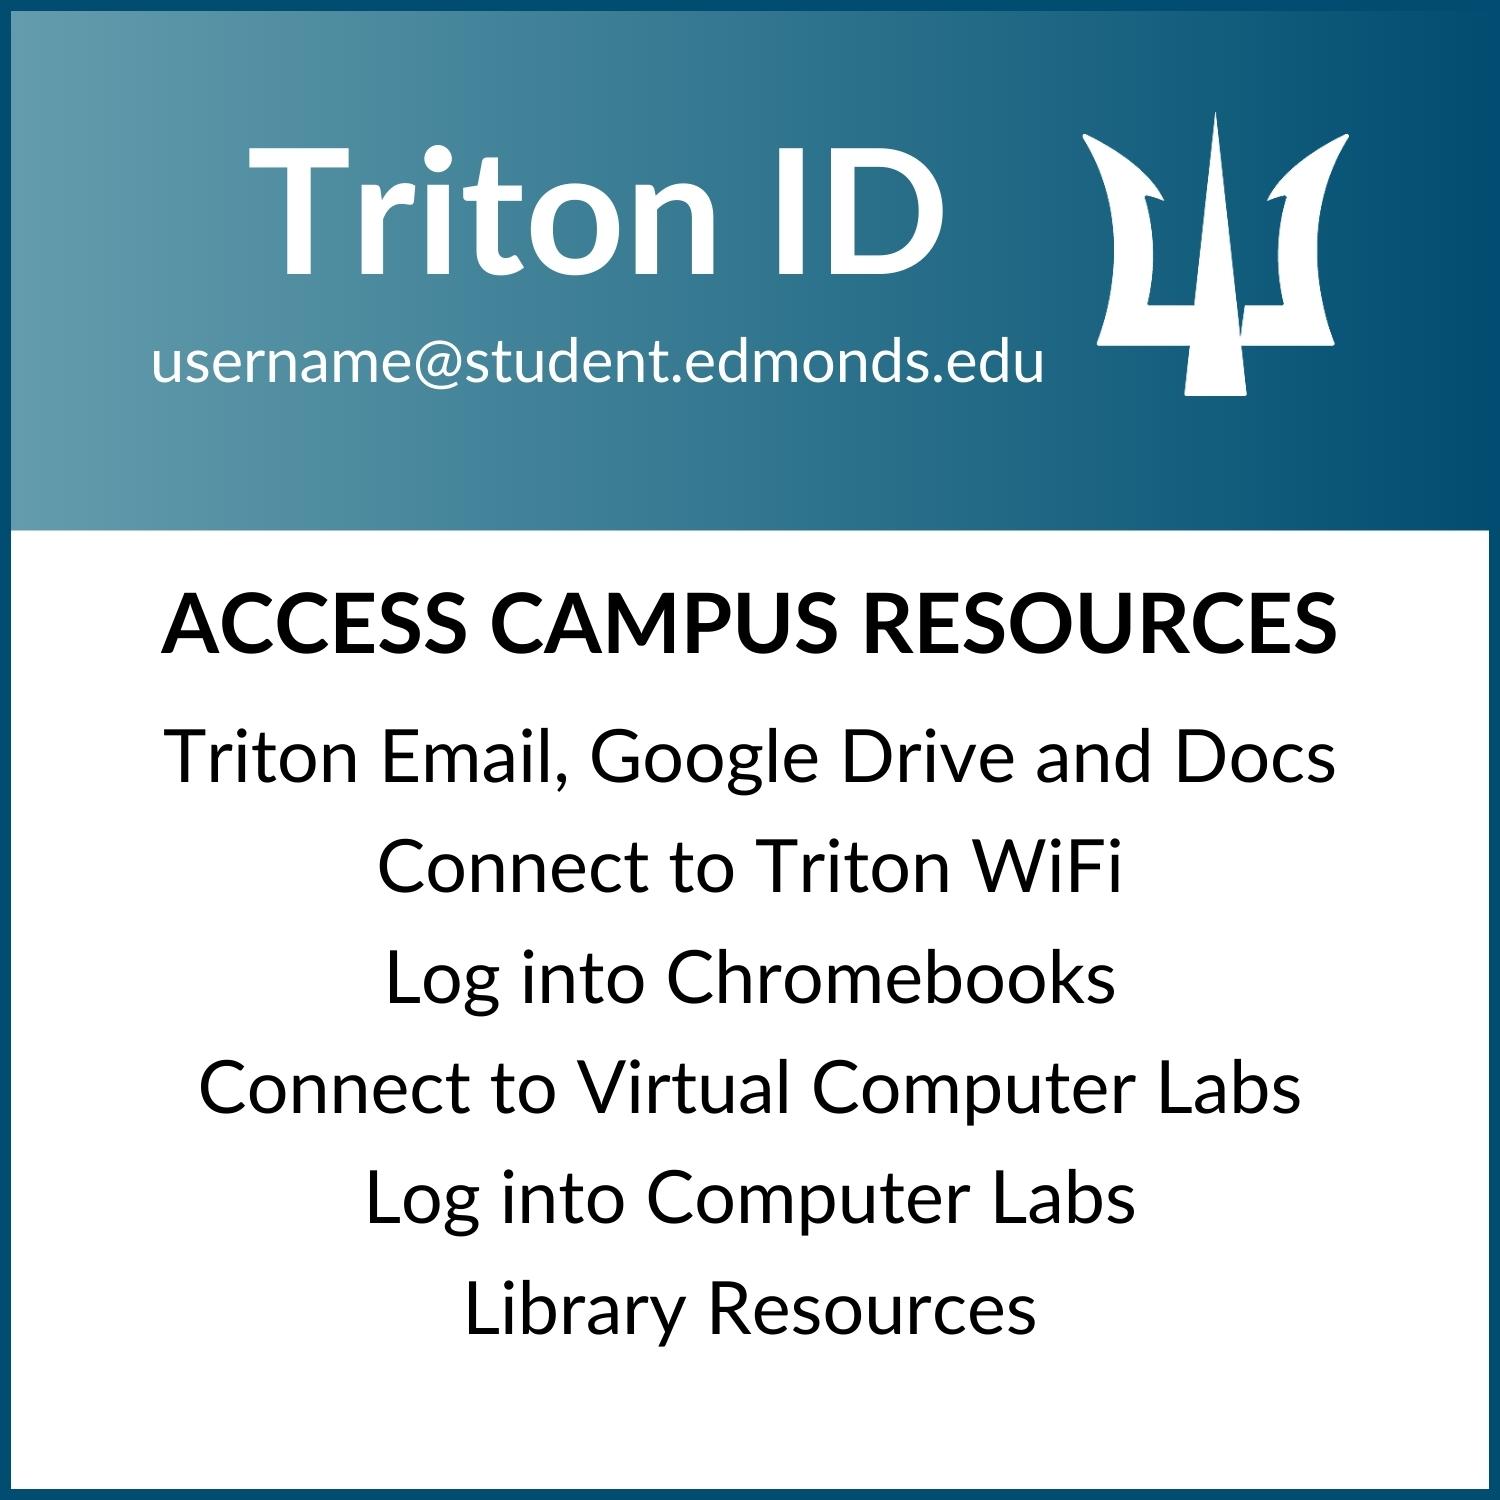 Triton Access - Access technology resources with your Triton ID: Access Triton Email, Drive, Docs, and More, connect to Triton WiFi, Log in to Chromebooks, Connect to virtual comoputer labs, log in to computer labs